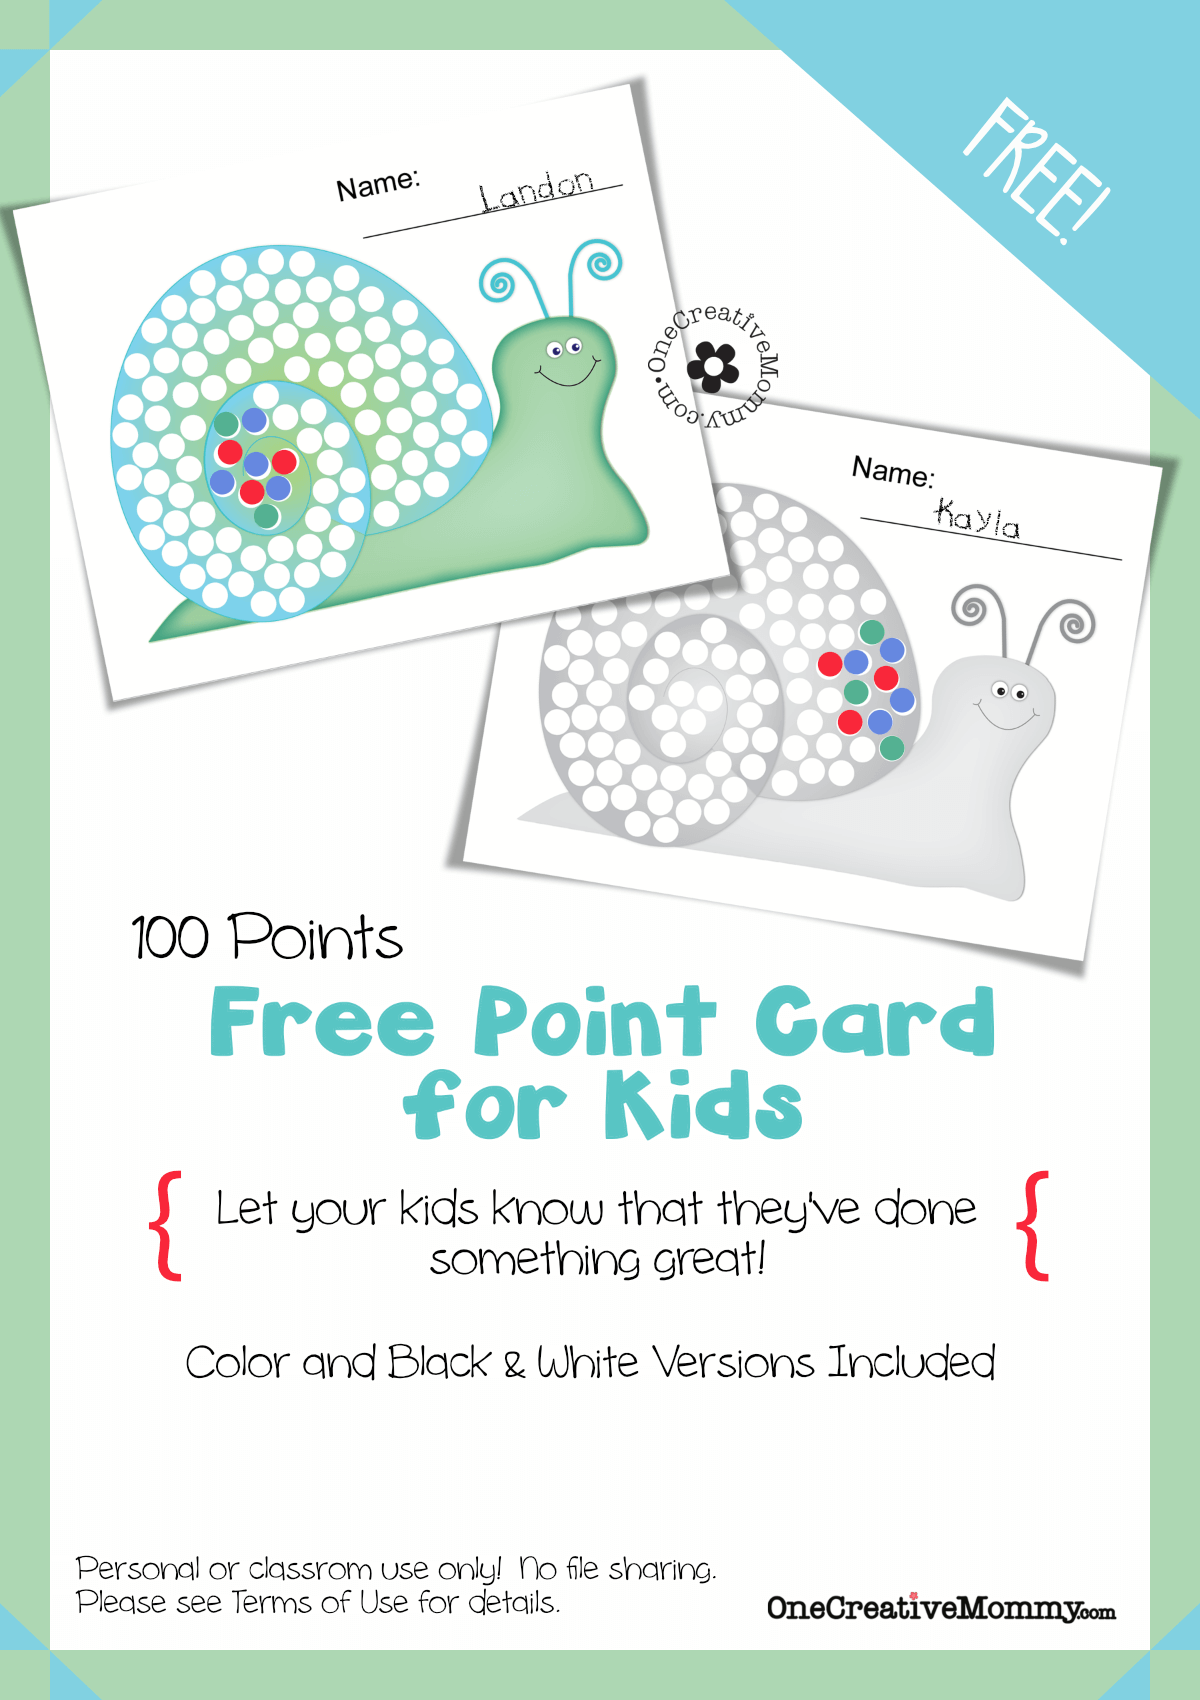 Point cards are perfect for motivating kids and keeping track of their successes. {Visit OneCreativeMommy.com to download the newest free design: 100-Point Snail Point Card for Kids}